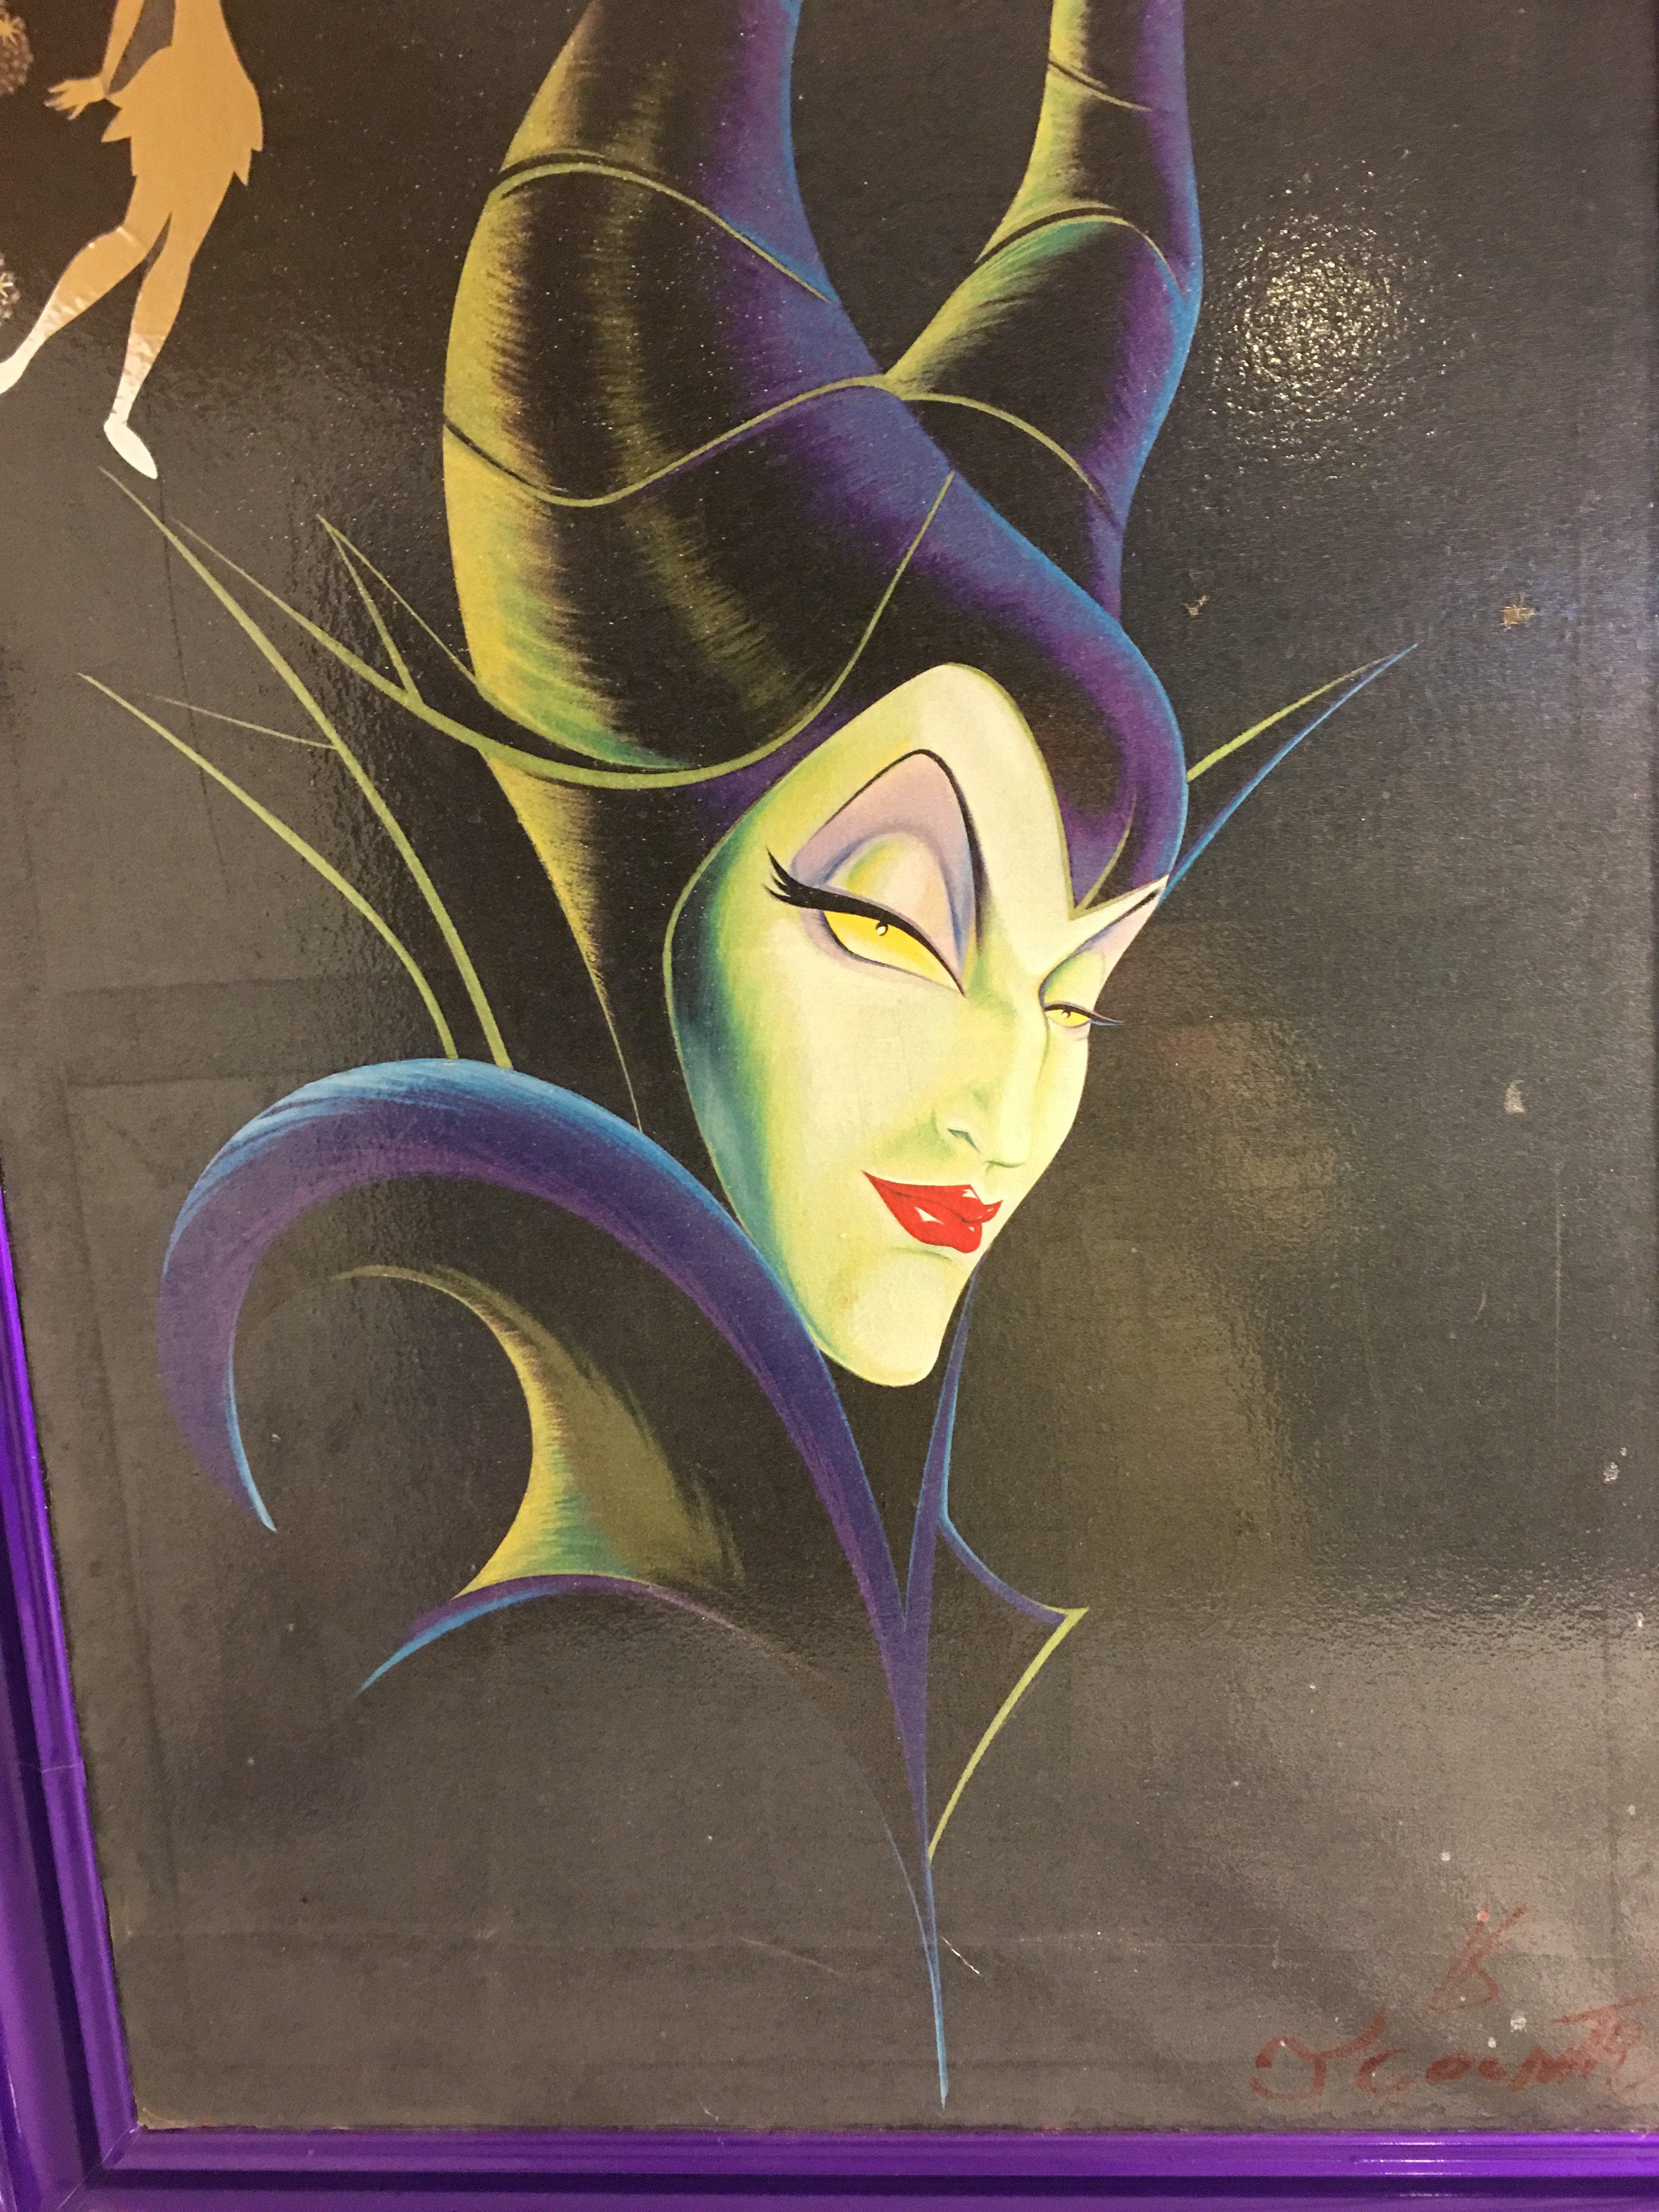 Collector Original Painting On Canvas Signed "Evil Queen" From Snow white & Seven Drwafts in Frame